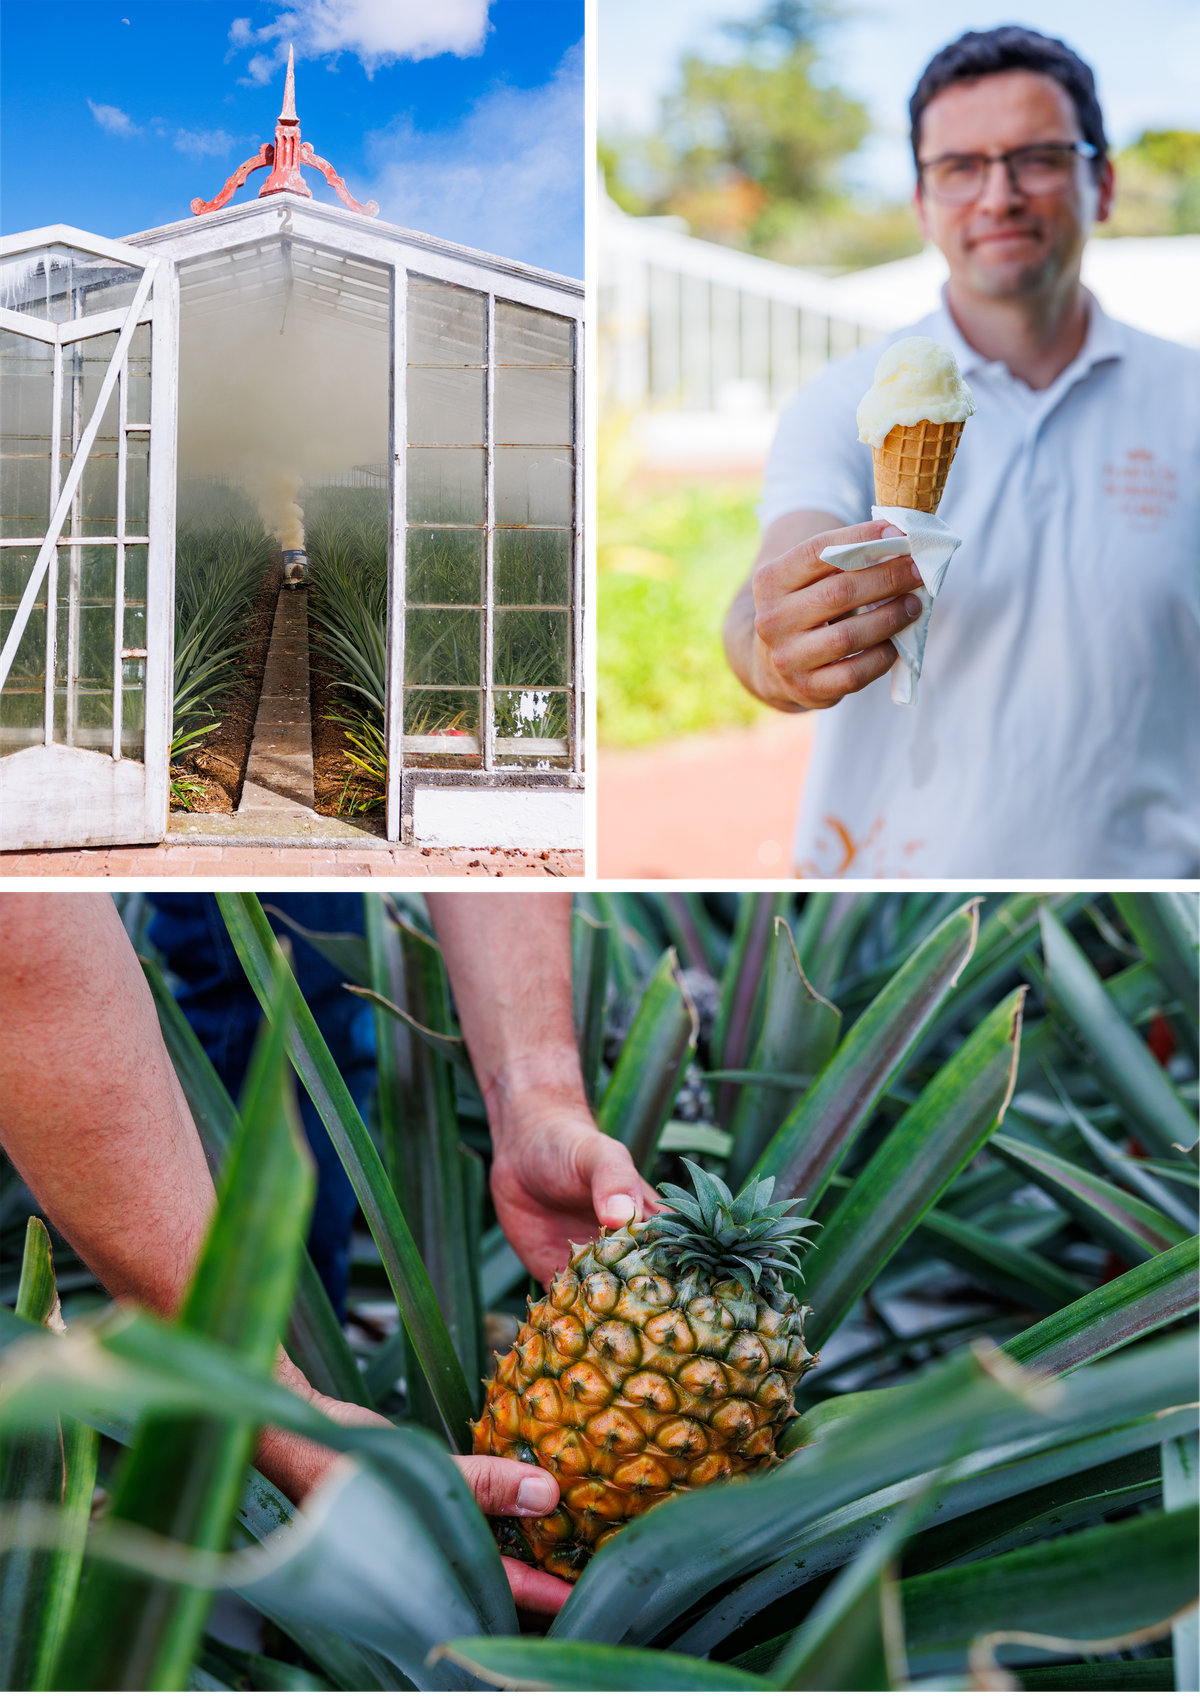 Clockwise from top left: “Smoking” the greenhouse, which helps plants bloom simultaneously; pineapple ice cream; and pineapple-harvesting at the Plantação de Ananás dos Açores.